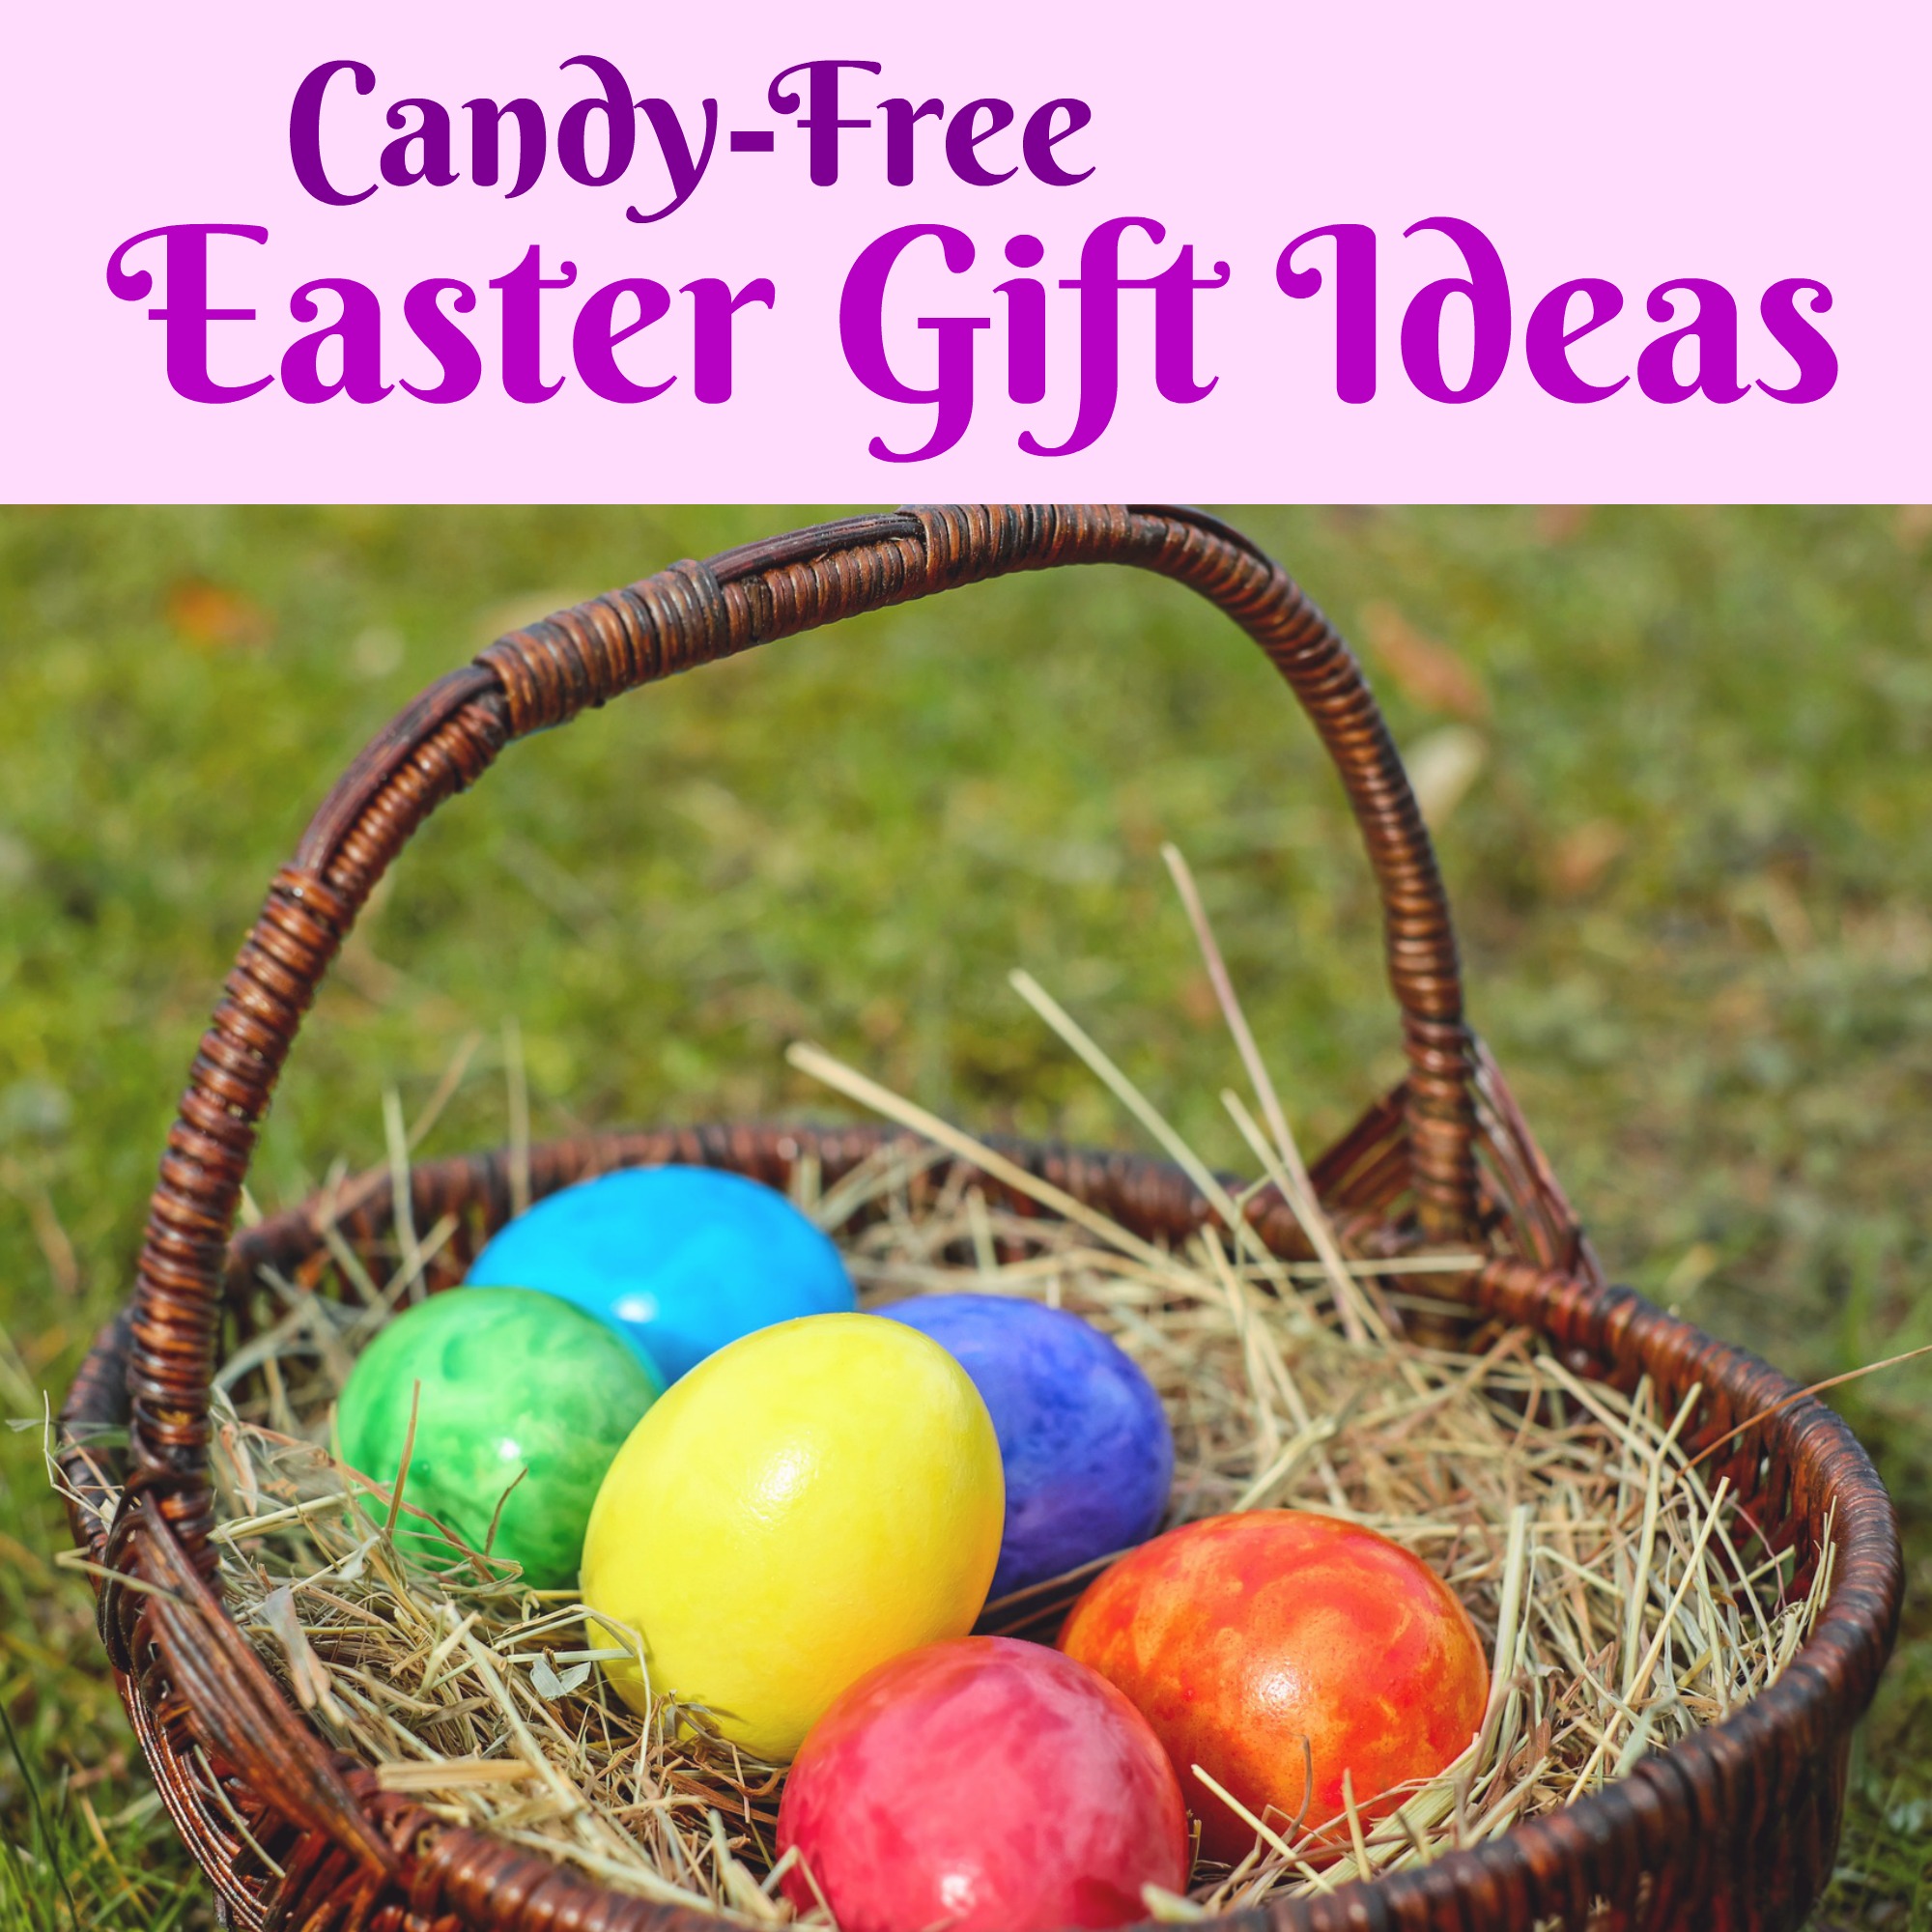 Candy-Free Easter Gift Ideas